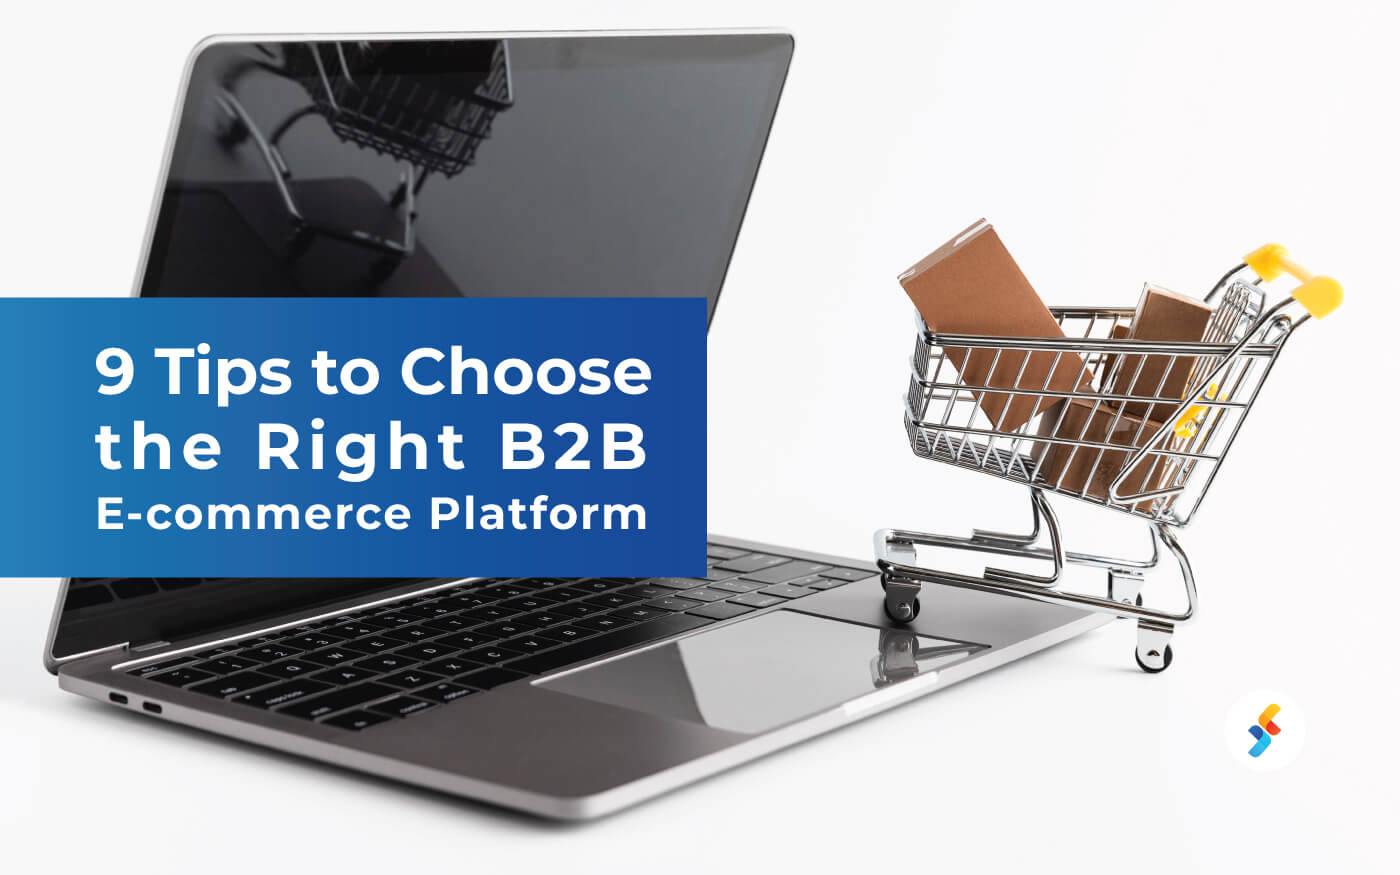 9 Tips to Choose the Right B2B eCommerce Platform